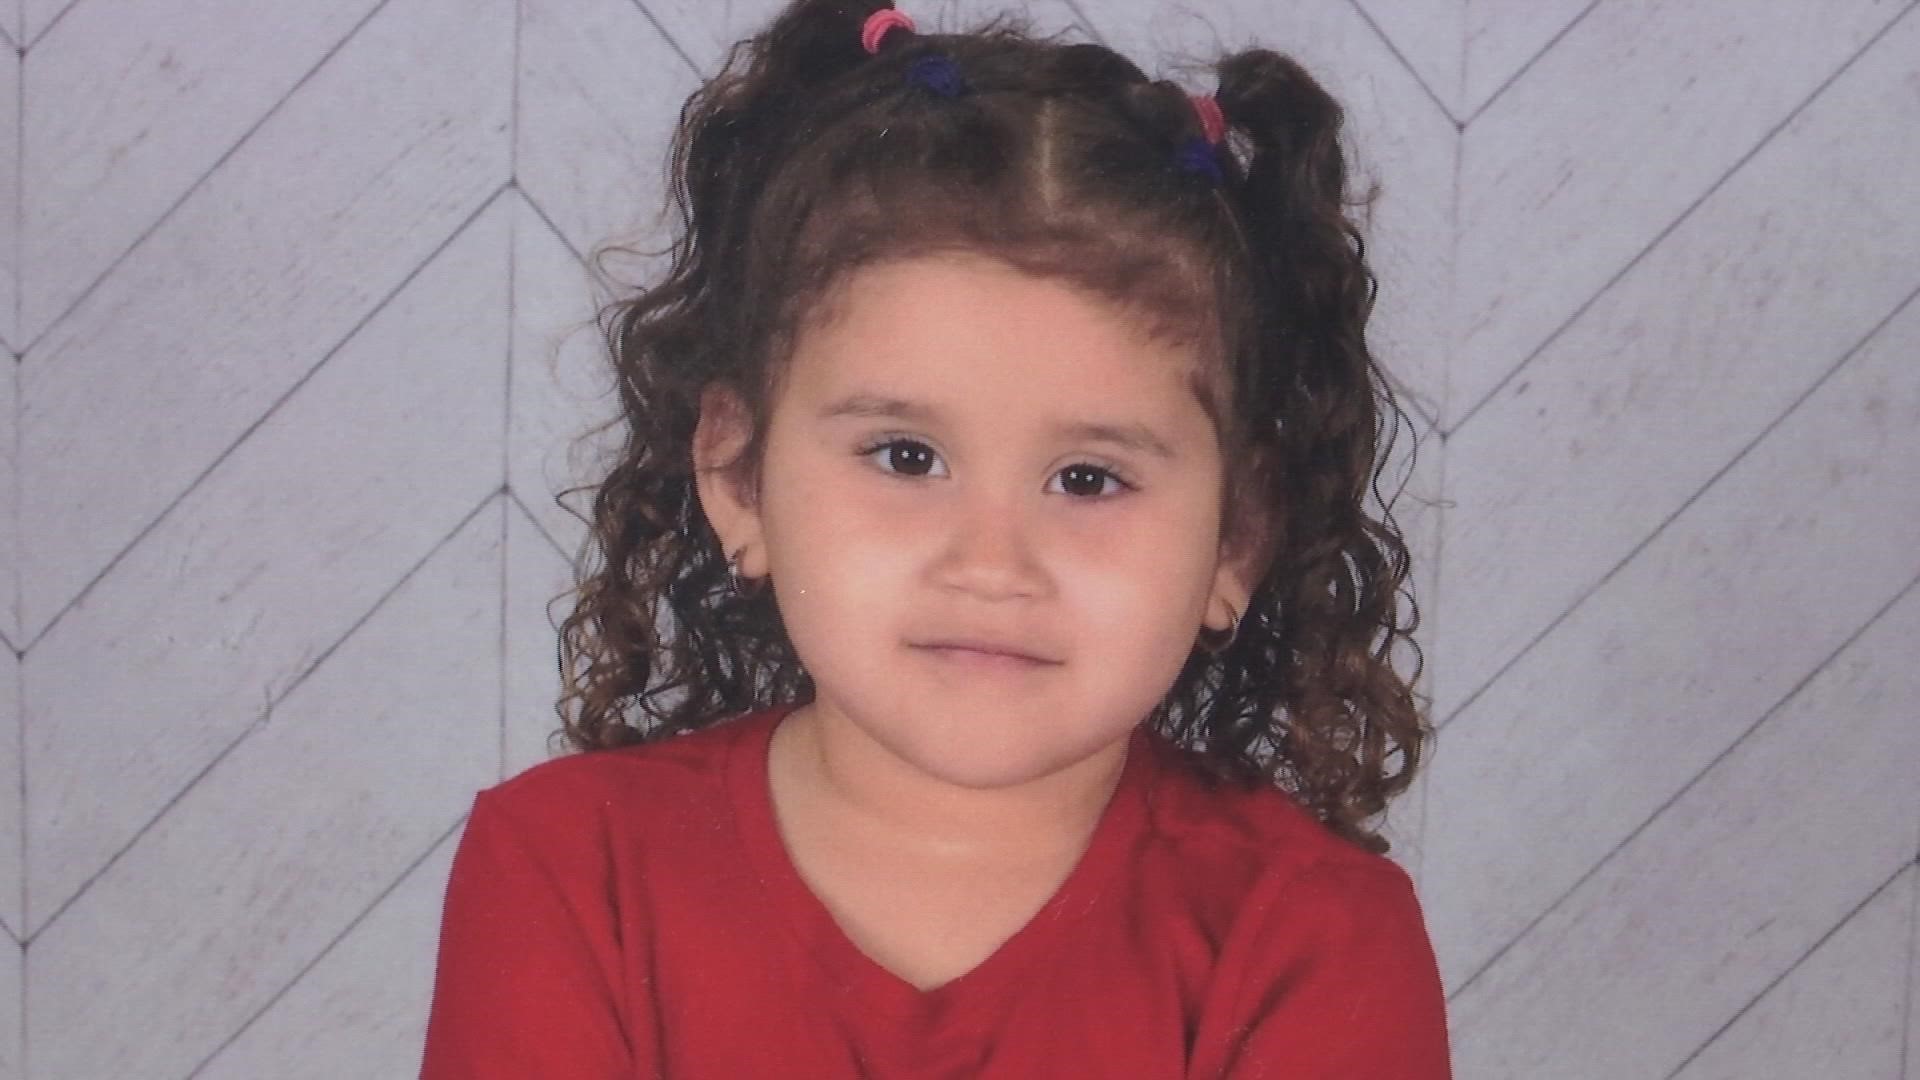 Beatriz Rodriguez's 4-year-old daughter, Catherine, was hit by a vehicle and killed on Halloween in northeast Columbus.